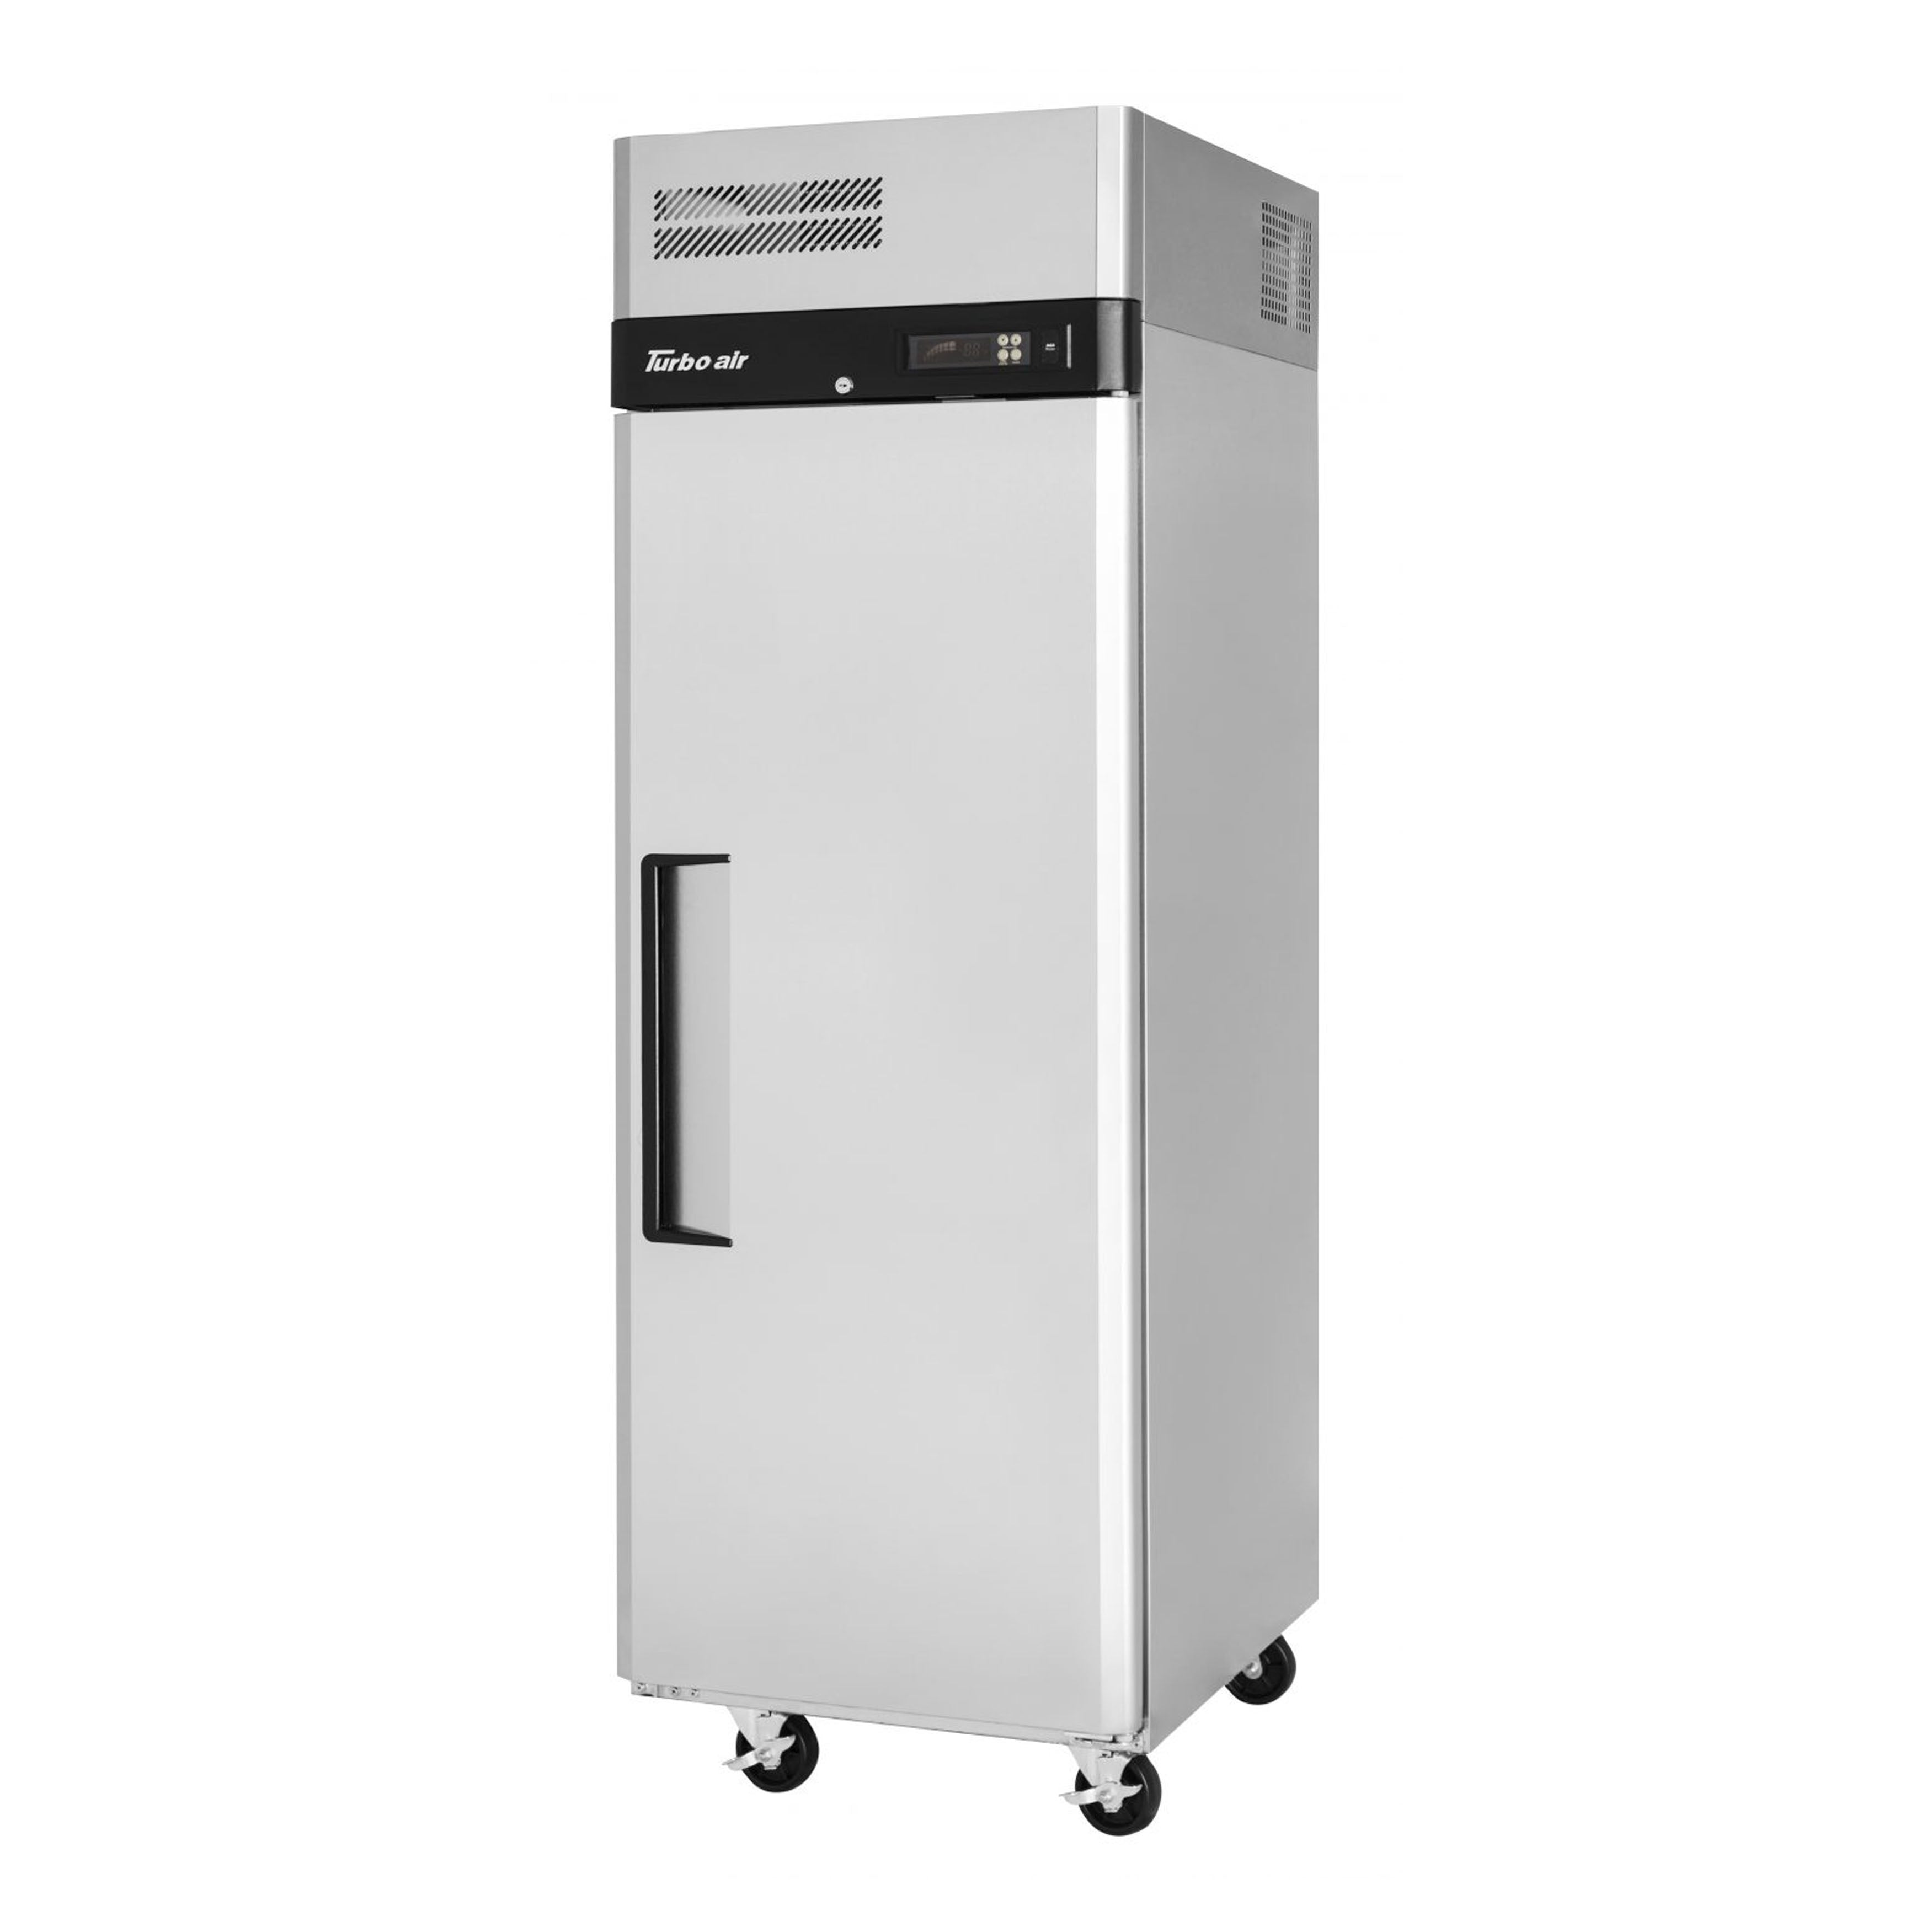 Turbo Air - M3F19-1-N, Commercial 25" Reach-in Freezer M3 Series Stainless Steel 18.7 cu. ft.